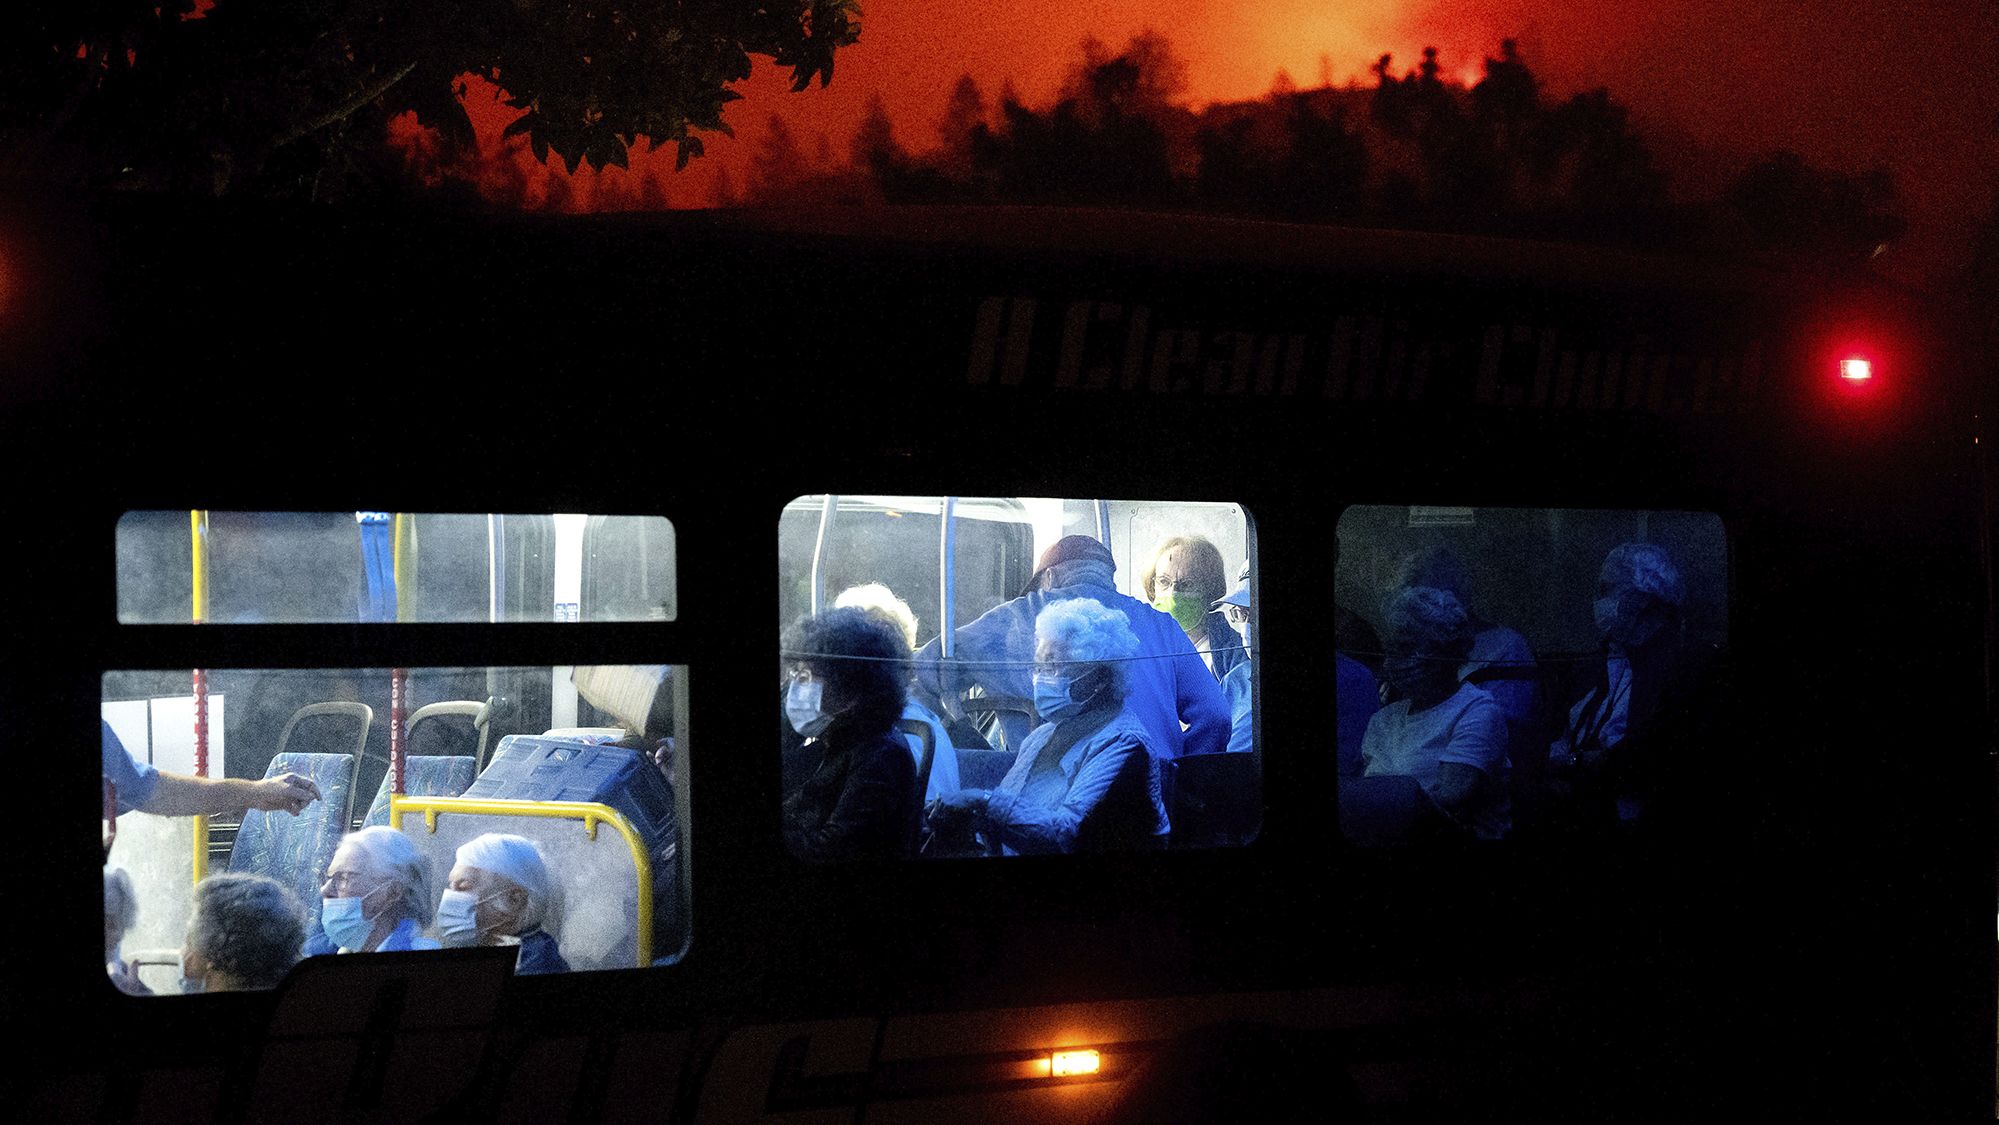 Residents of the Oakmont Gardens senior home are transported to safety as the Shady Fire approaches in Santa Rosa on September 28, 2020.